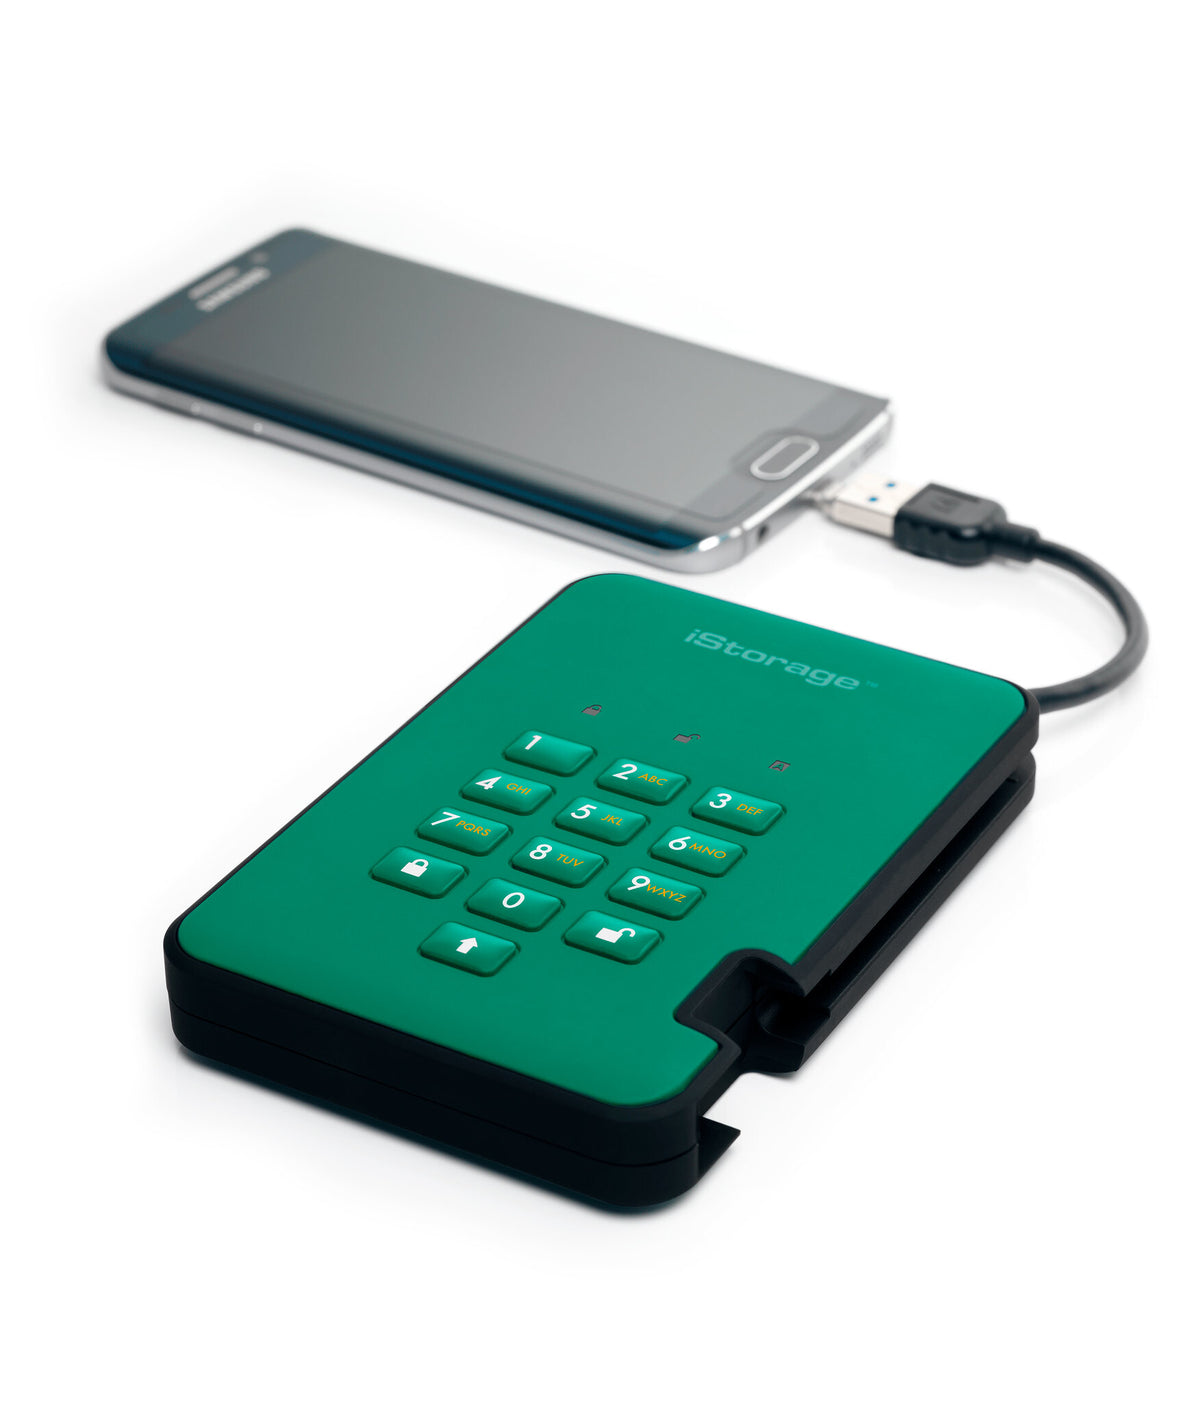 iStorage diskAshur2 - Secure Encrypted External solid state drive in Green - 1 TB